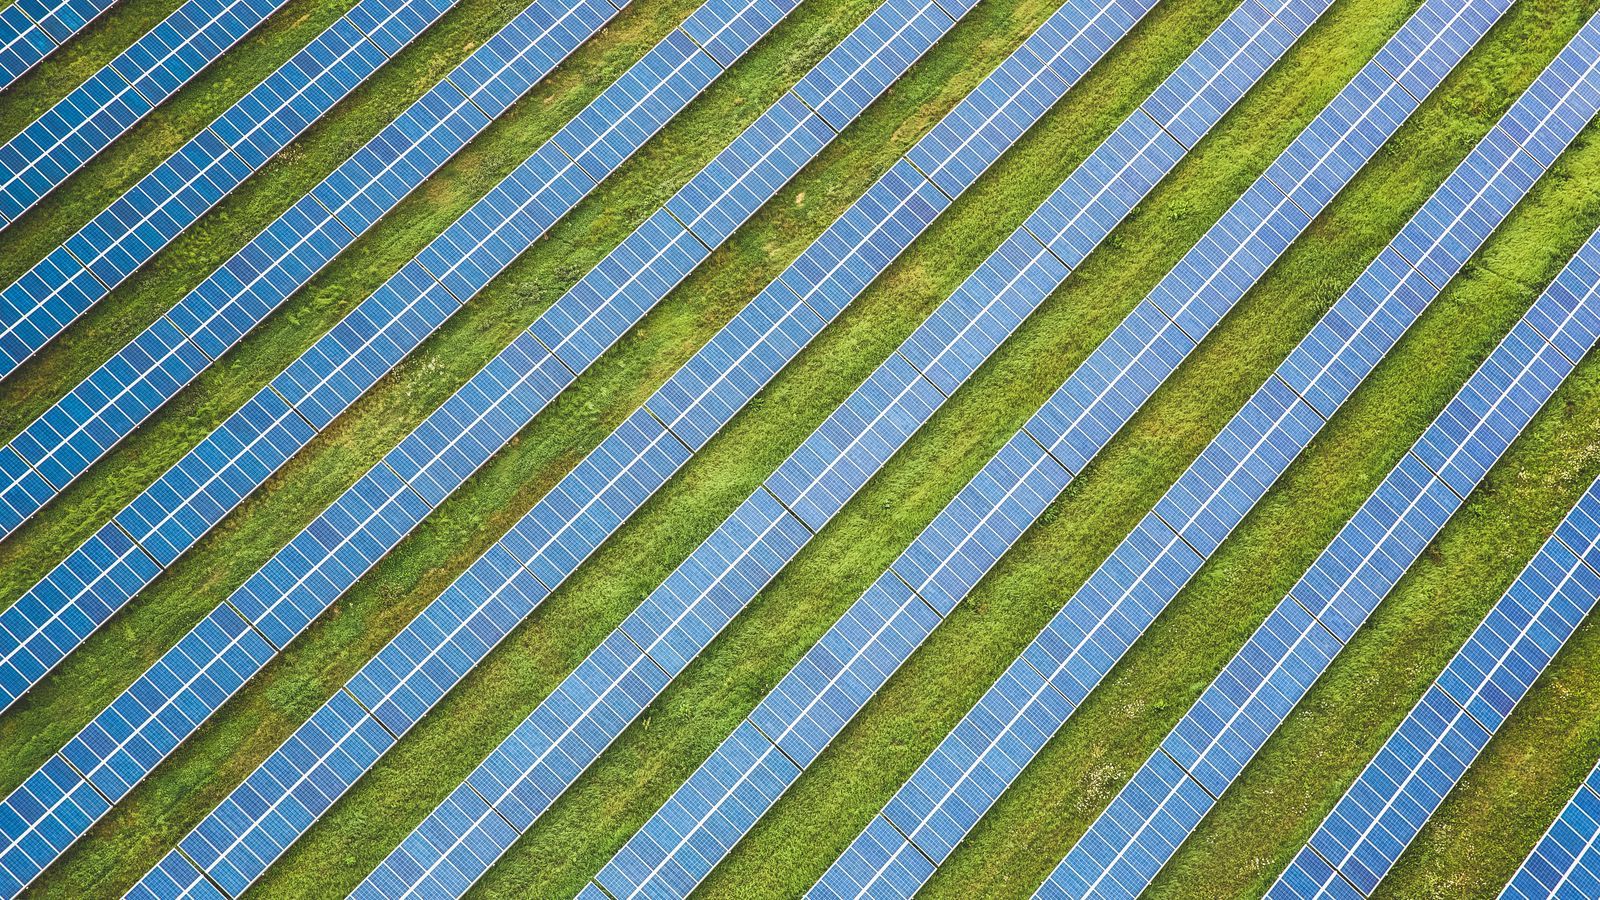 Download wallpaper 1600x900 solar panels, field, aerial view, texture, rows widescreen 16:9 HD background